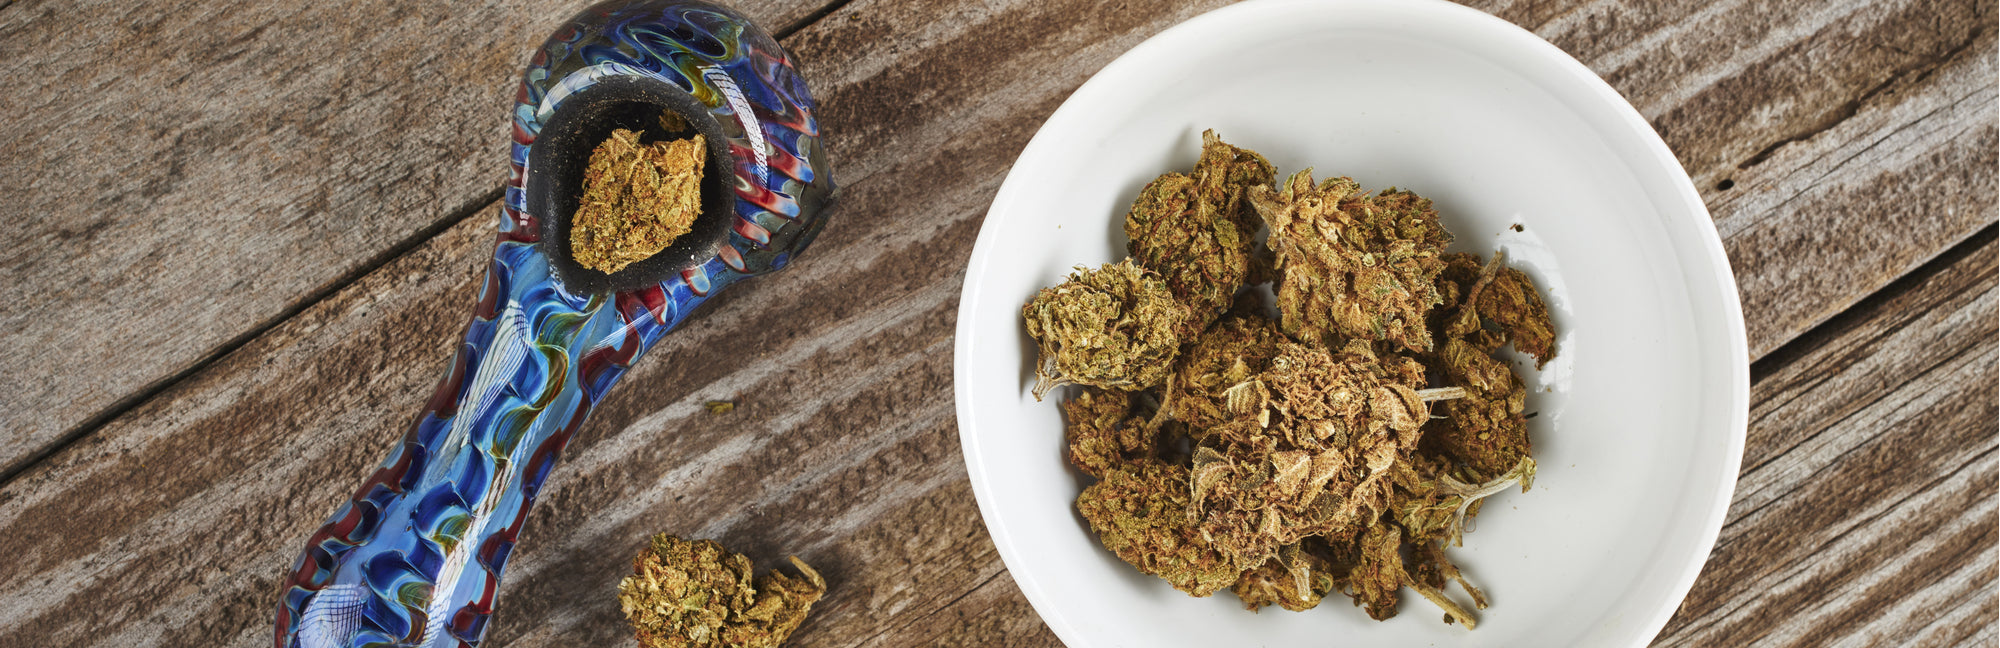 How to Pack a Bowl of Herb and Smoke